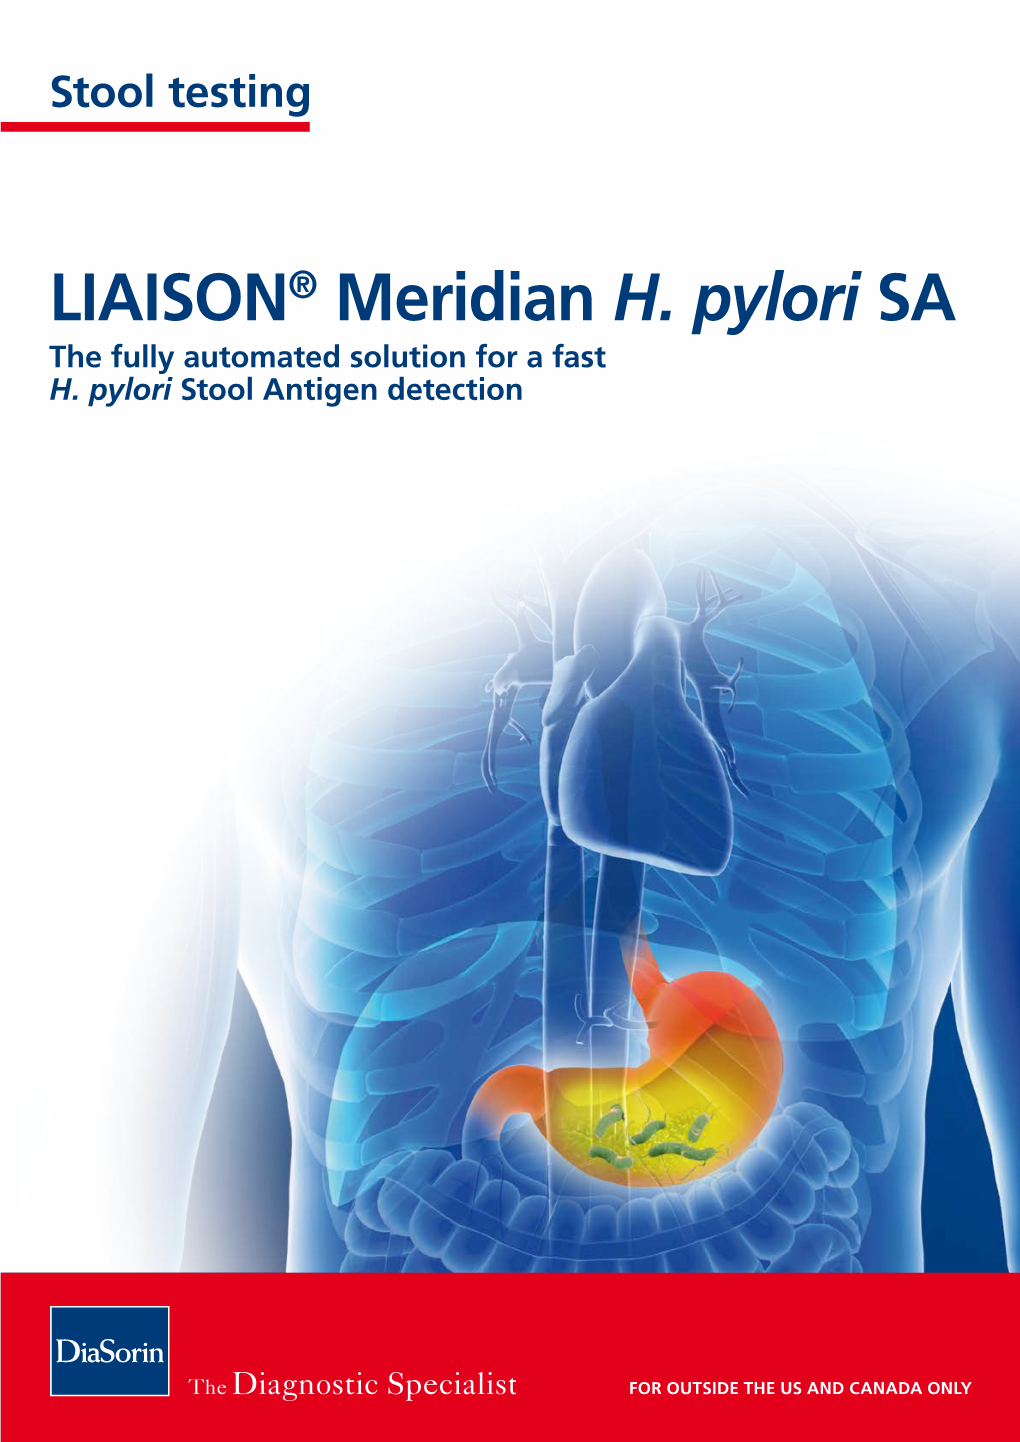 LIAISON® Meridian H. Pylori SA the Fully Automated Solution for a Fast H